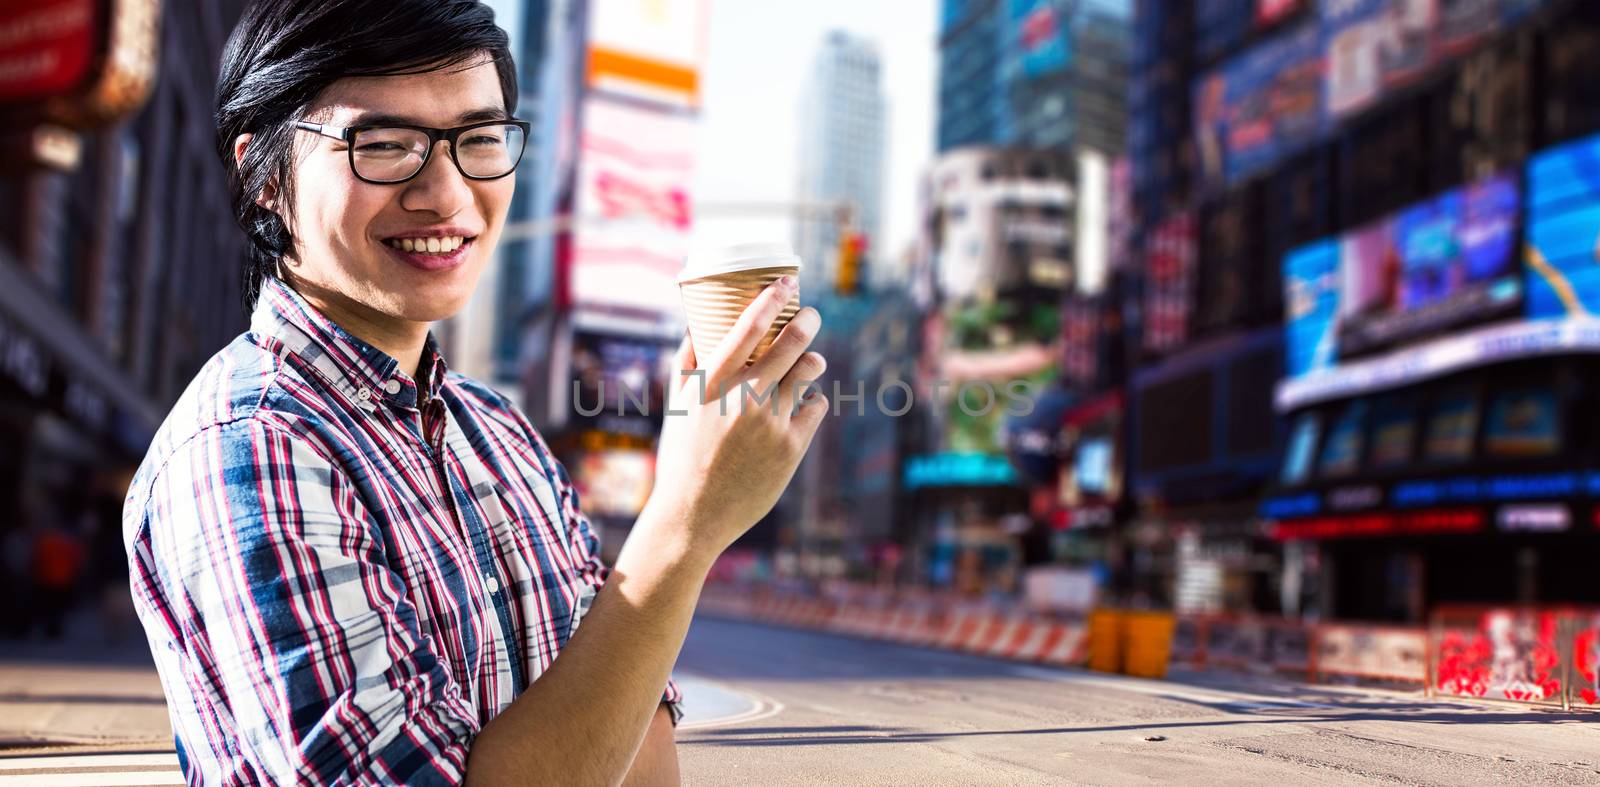 Smiling creative businessman with take-away coffee against blurry new york street